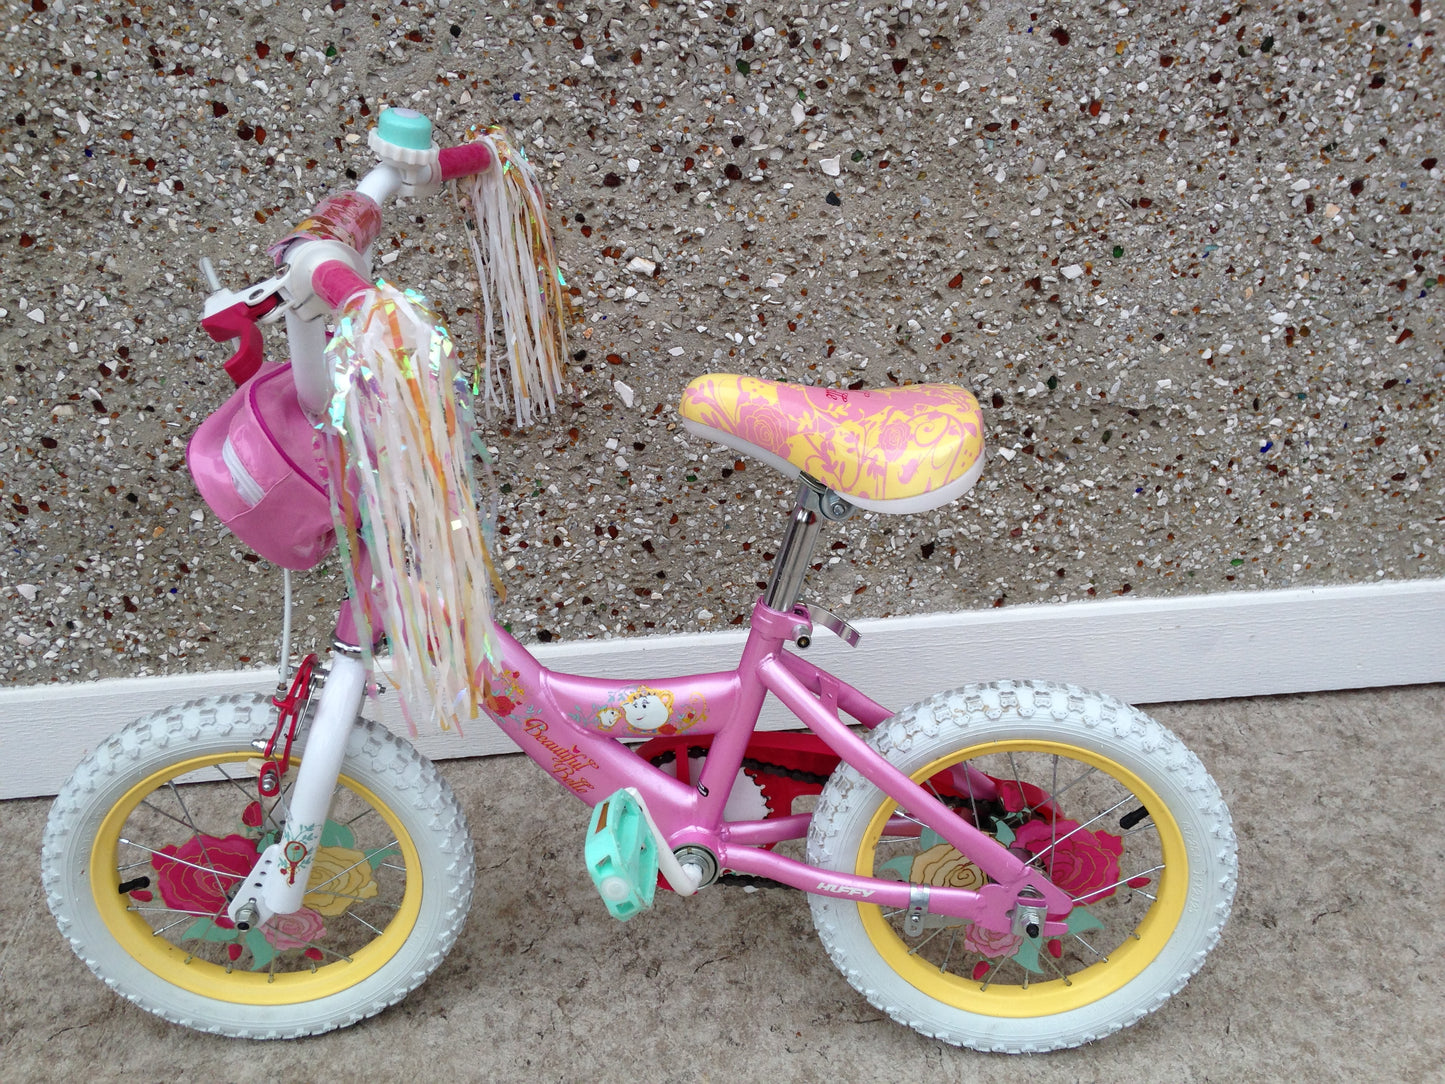 Bike Child 14 inch Belle Princess Beauty Beast With Training Wheels As New Mint Condition